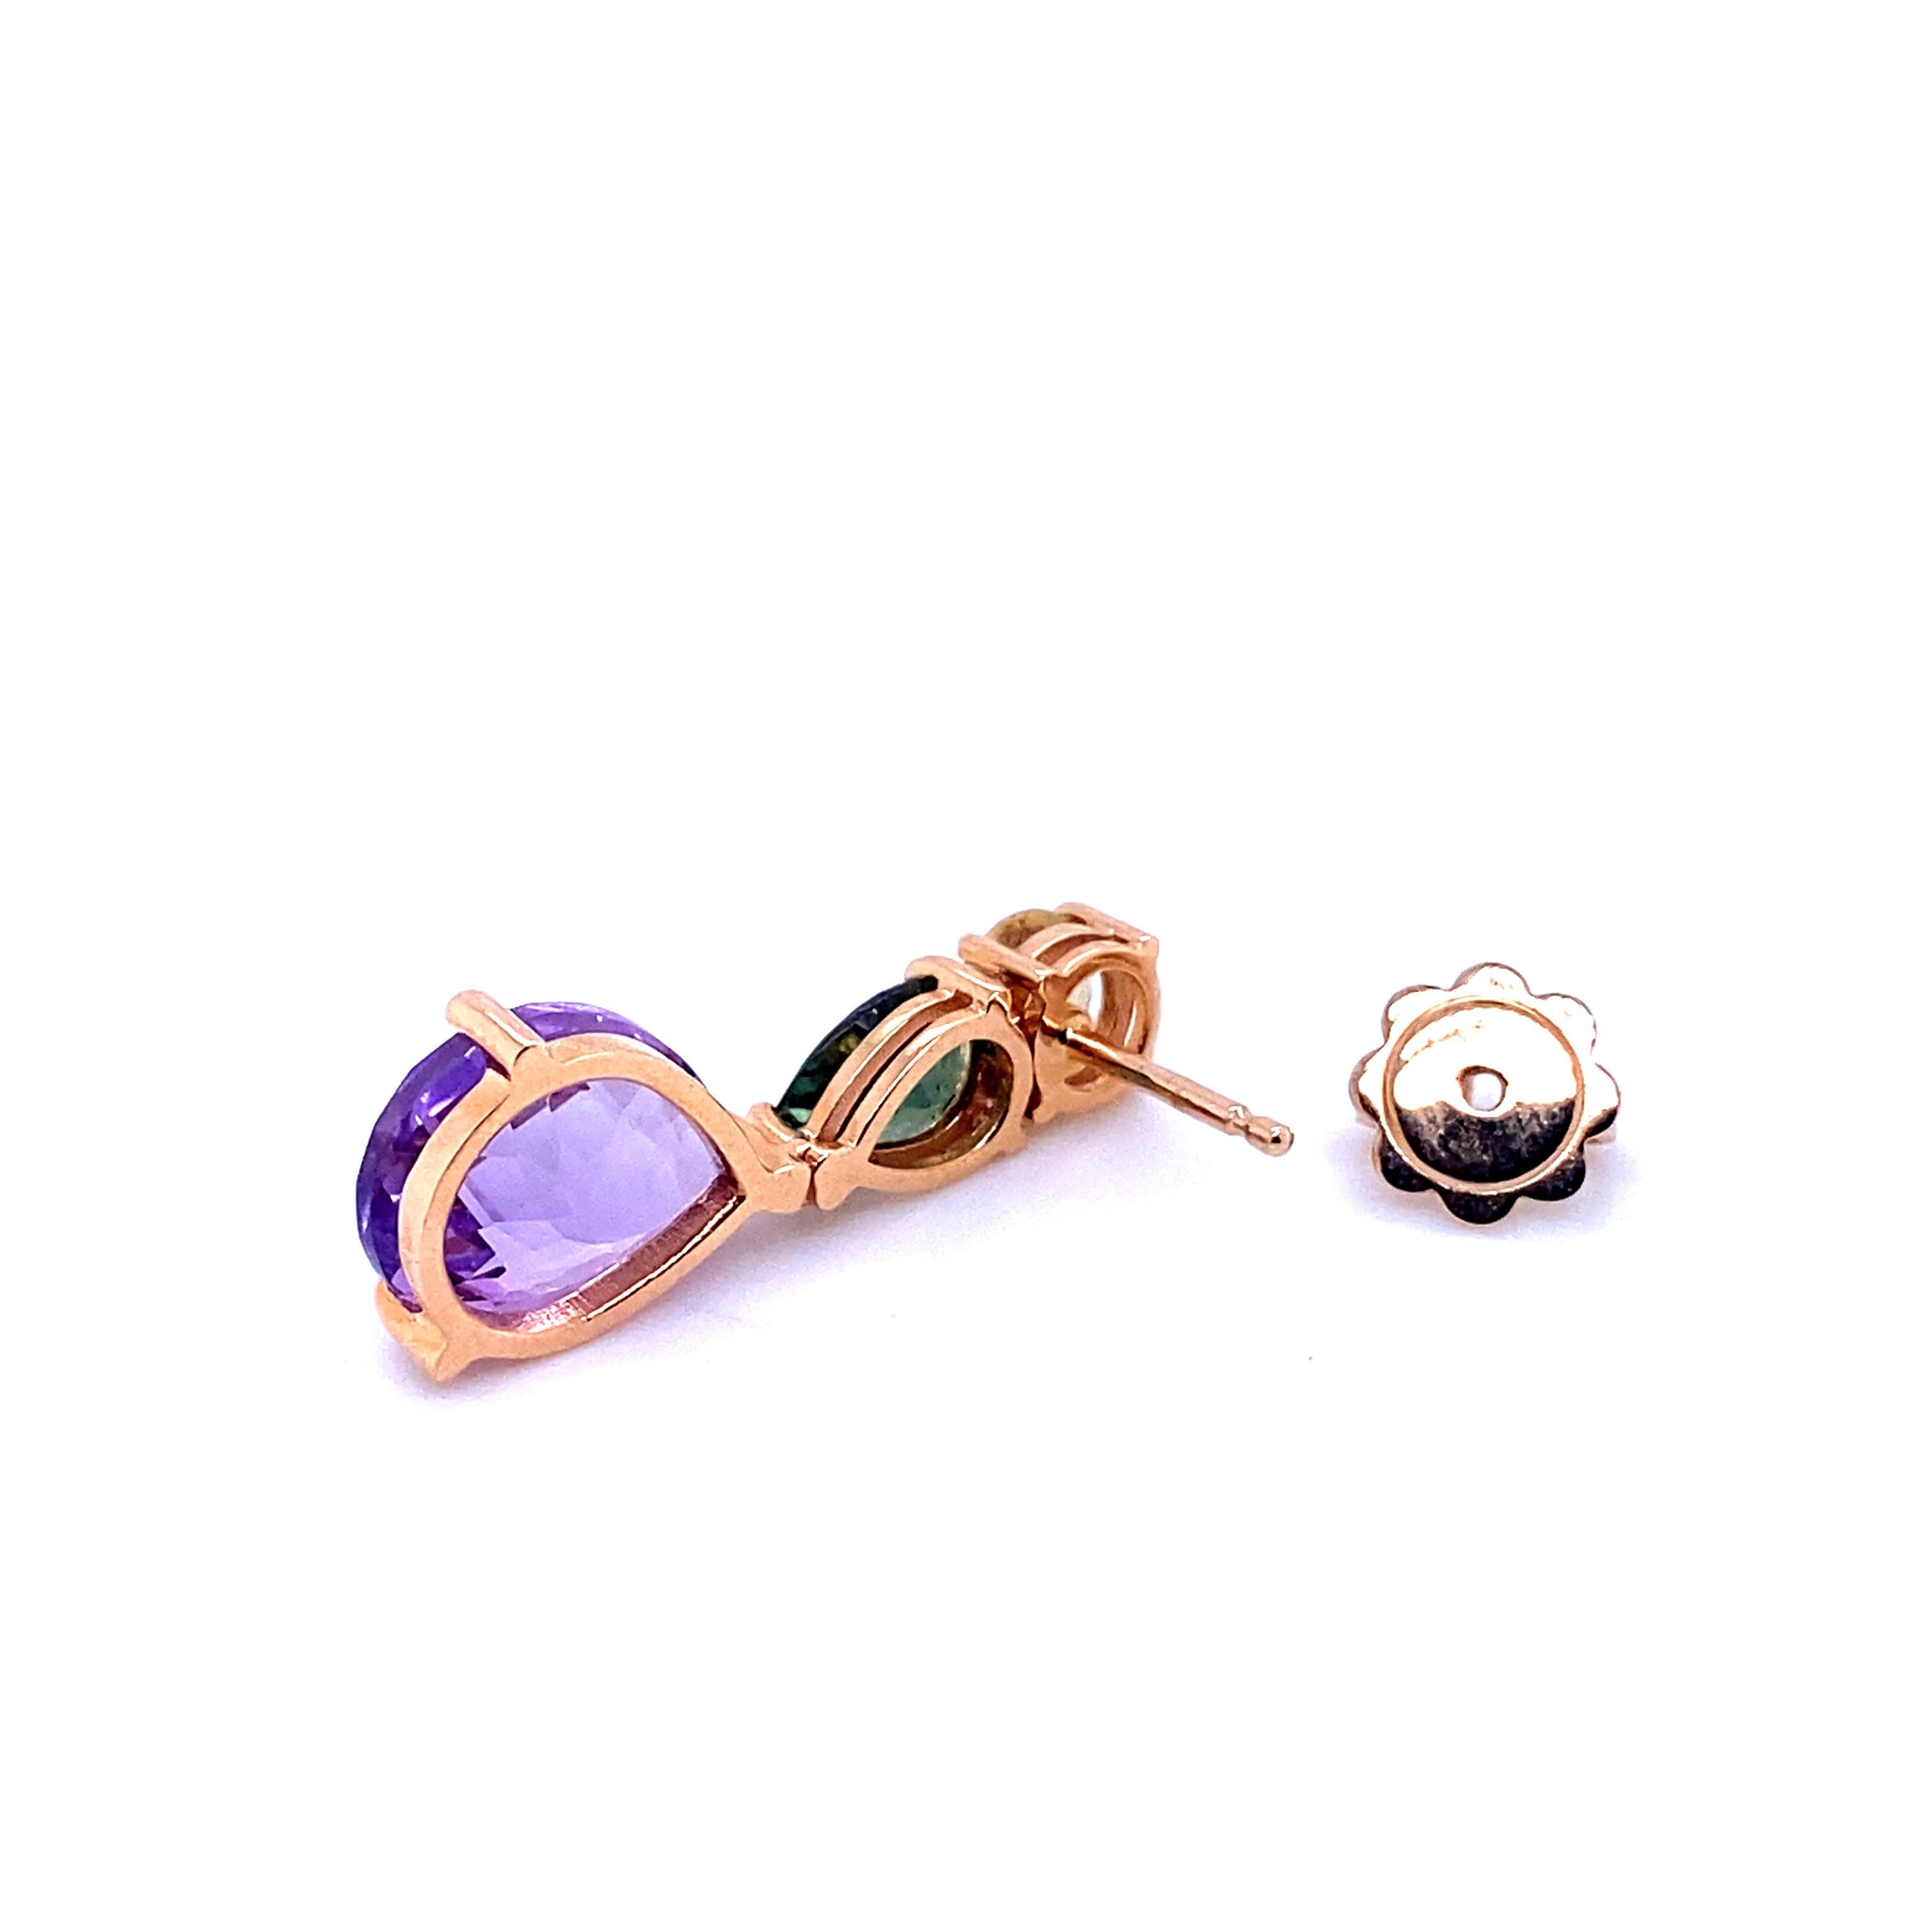 Artisan French Rose Gold Earrings Accompanied by a Amethyst, Citrine and Tourmaline For Sale